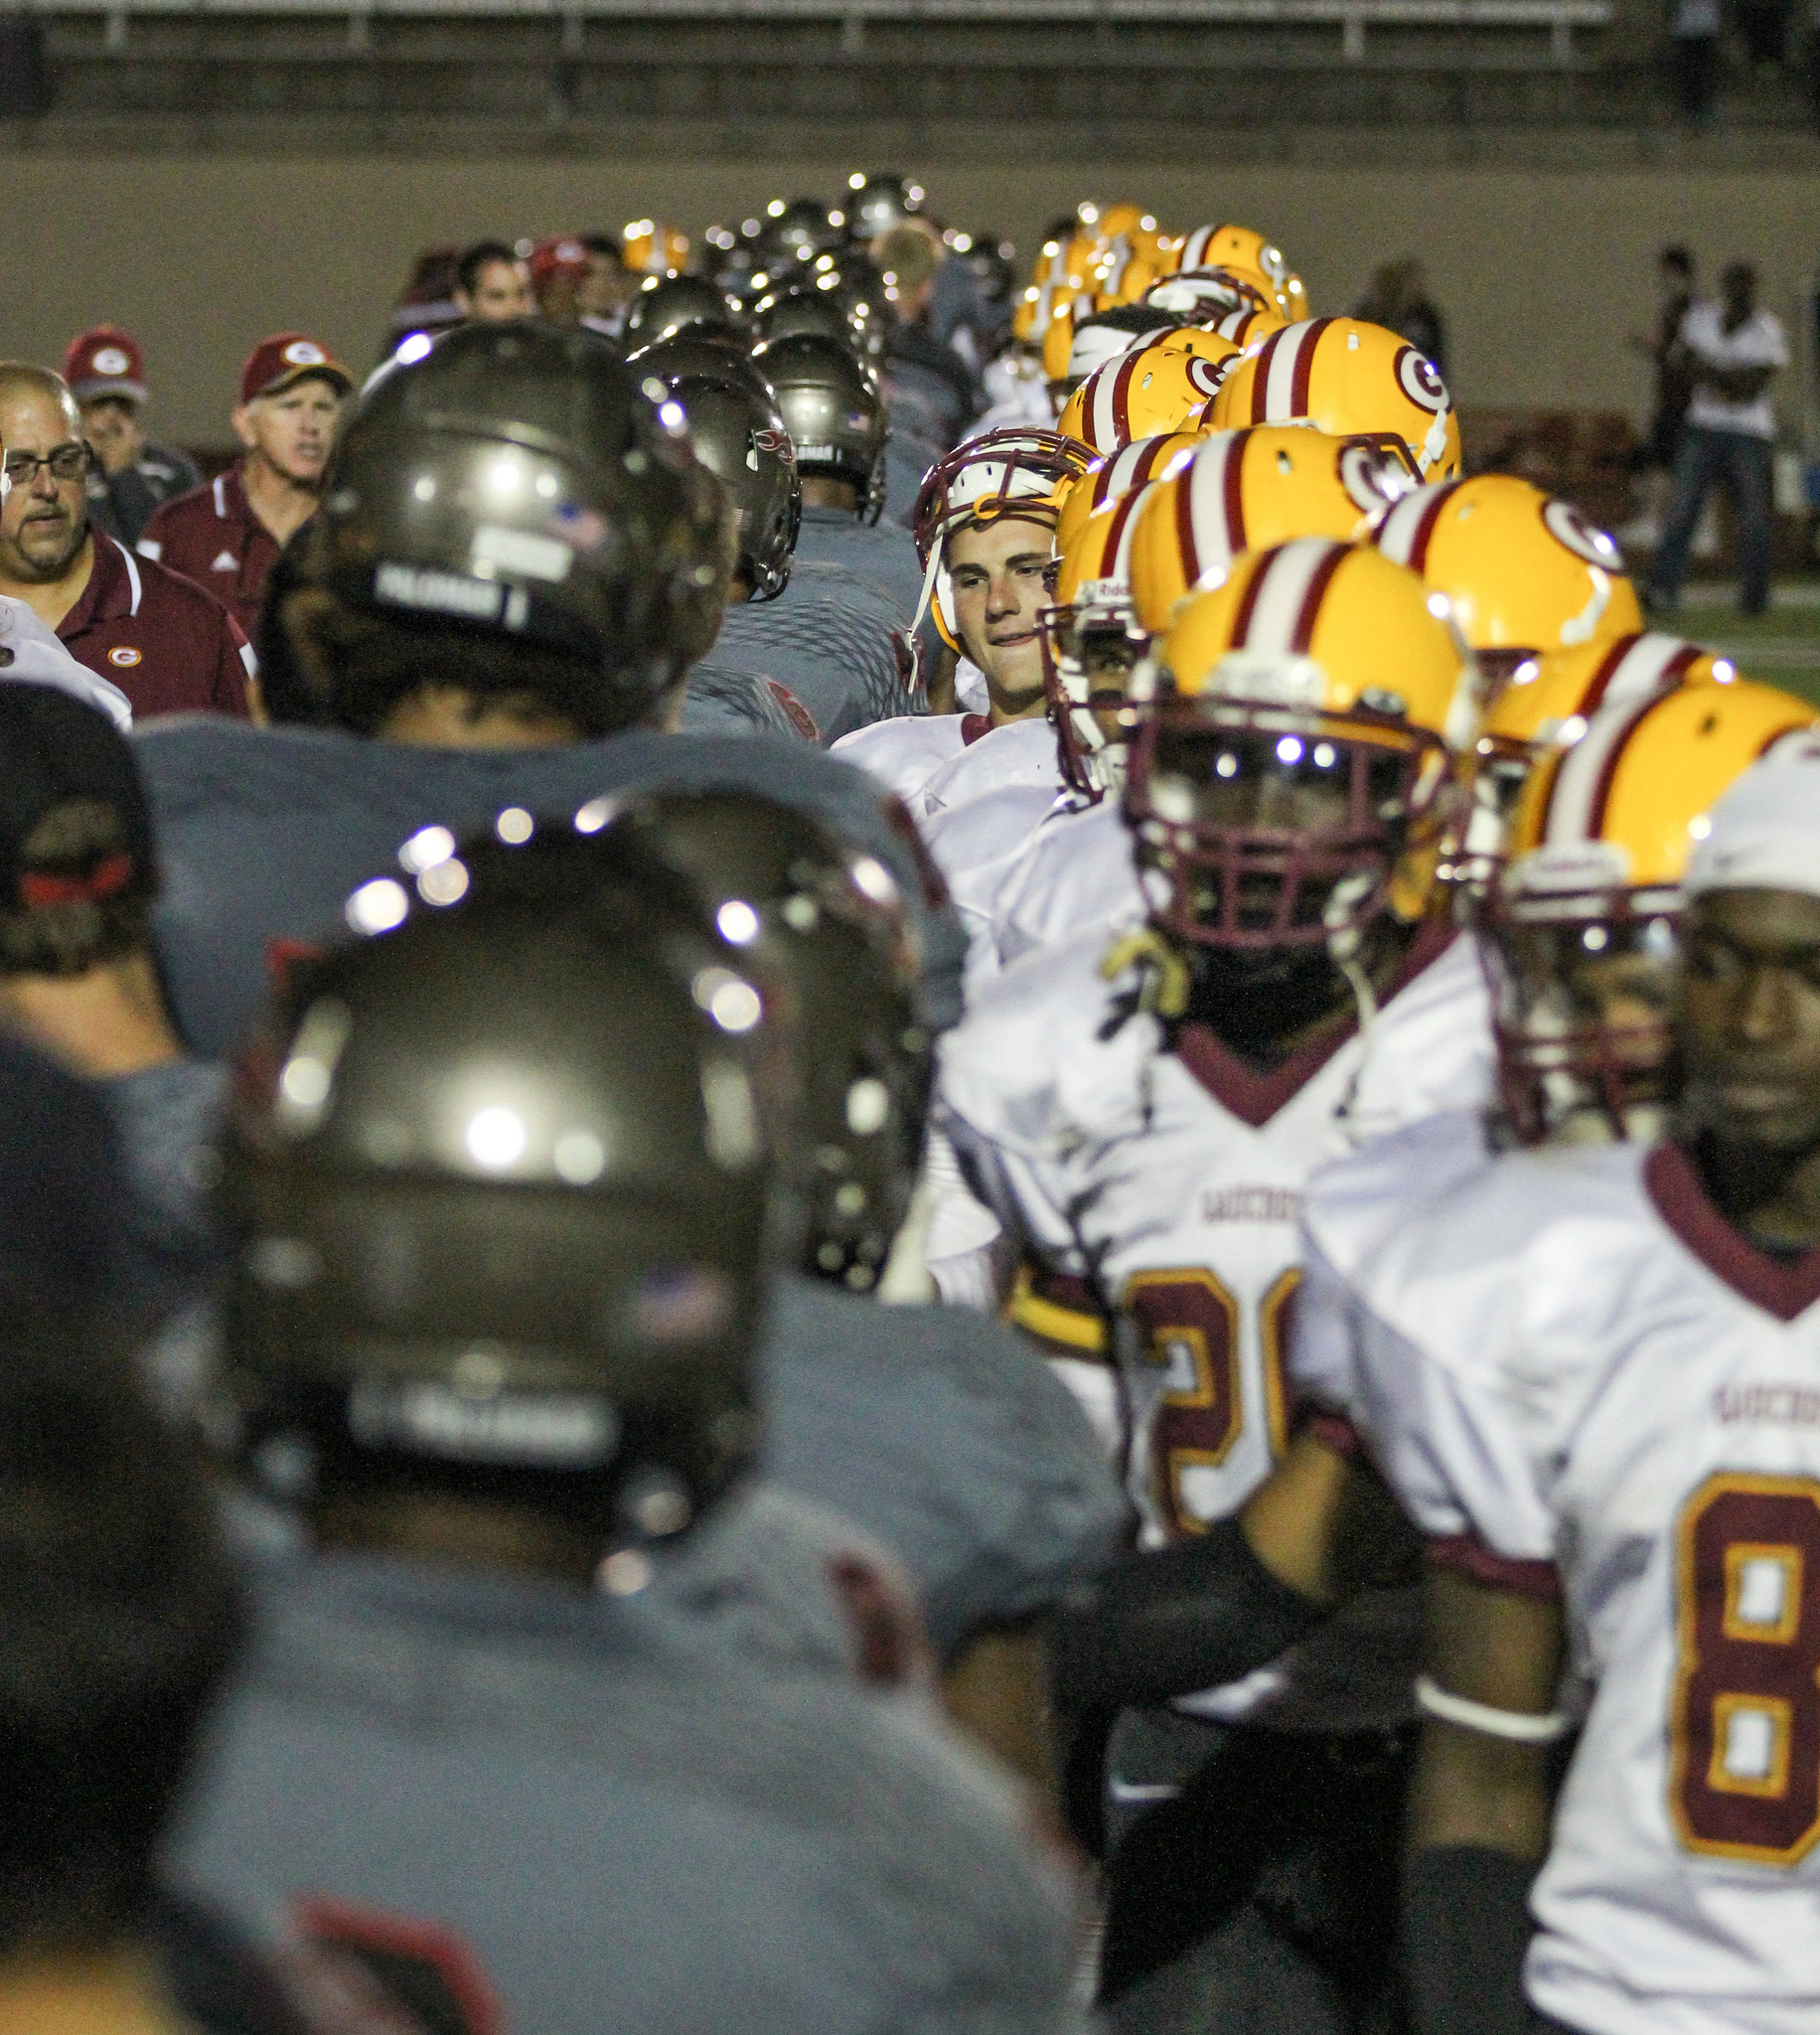 Palomar football players (left) shakes hands with Saddleback players, each team forming a line.